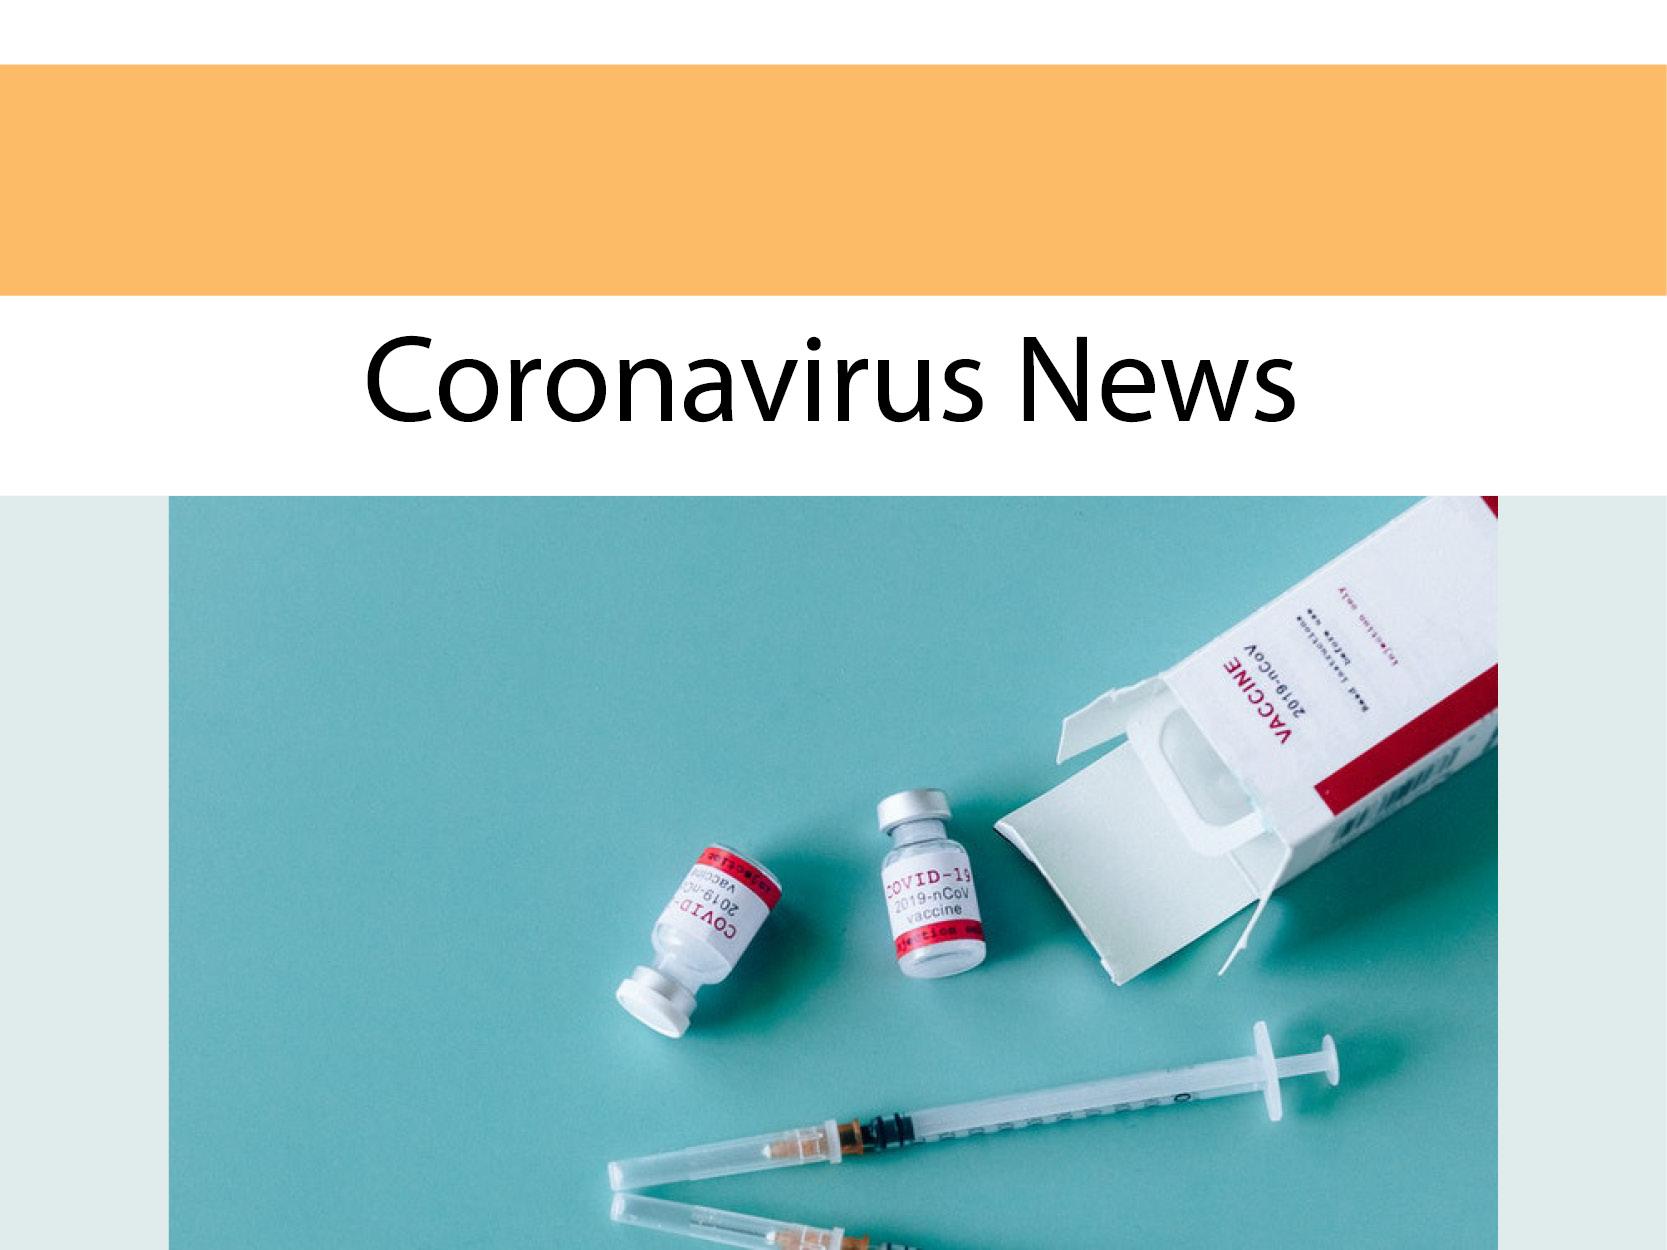 Argenteuil residents under 60 with high-risk conditions, and essential workers now eligible for COVID-19 vaccination